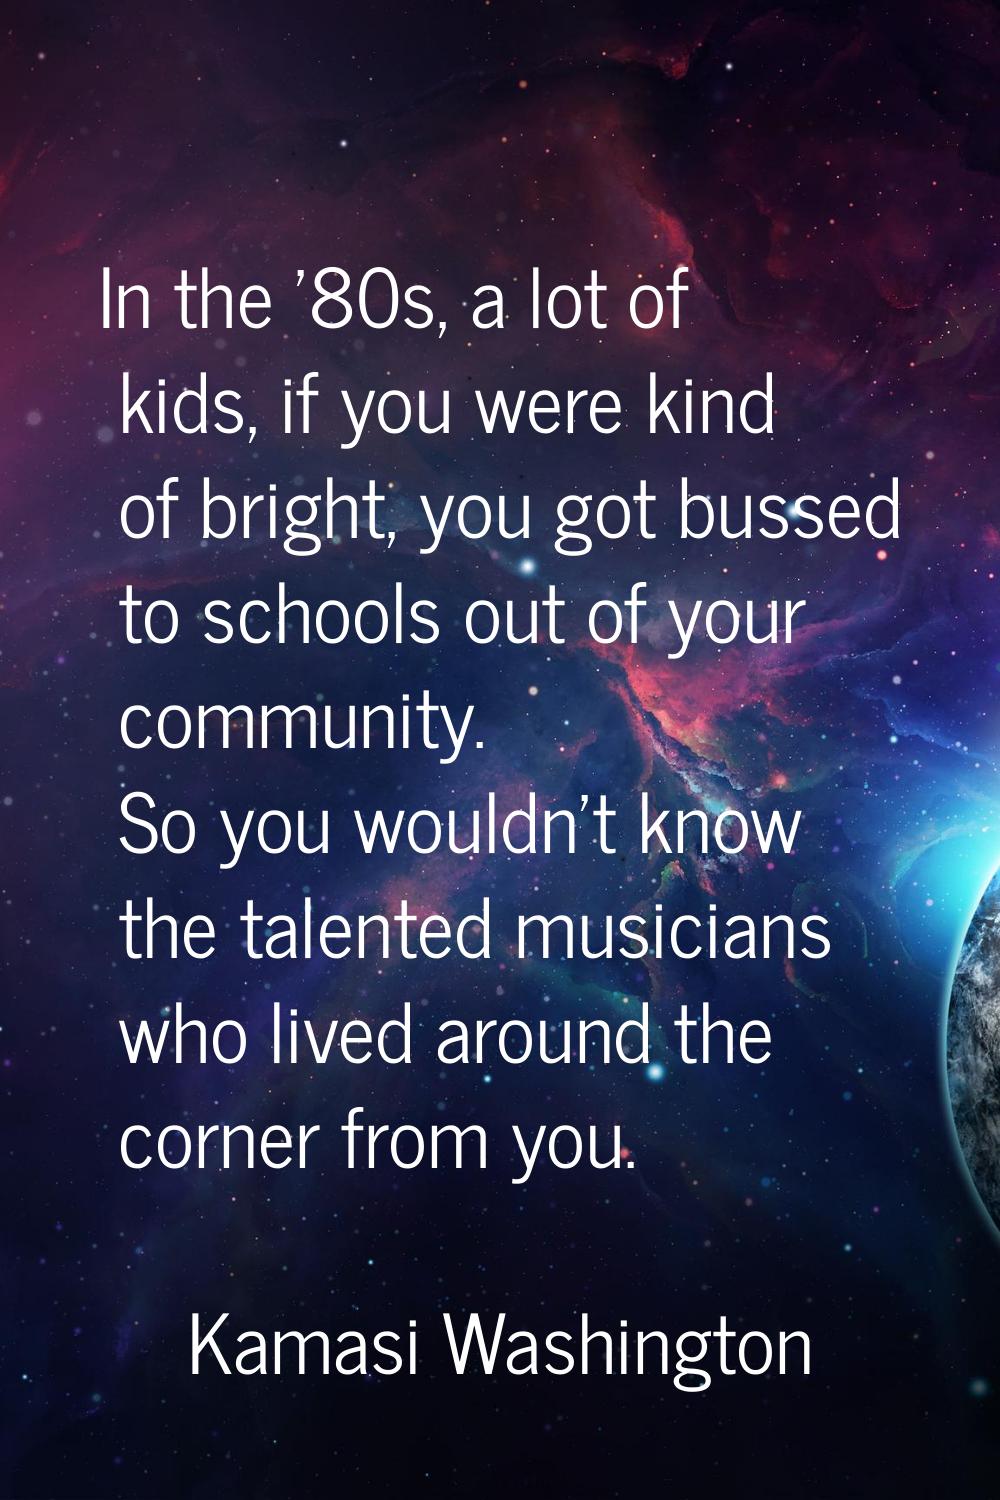 In the '80s, a lot of kids, if you were kind of bright, you got bussed to schools out of your commu